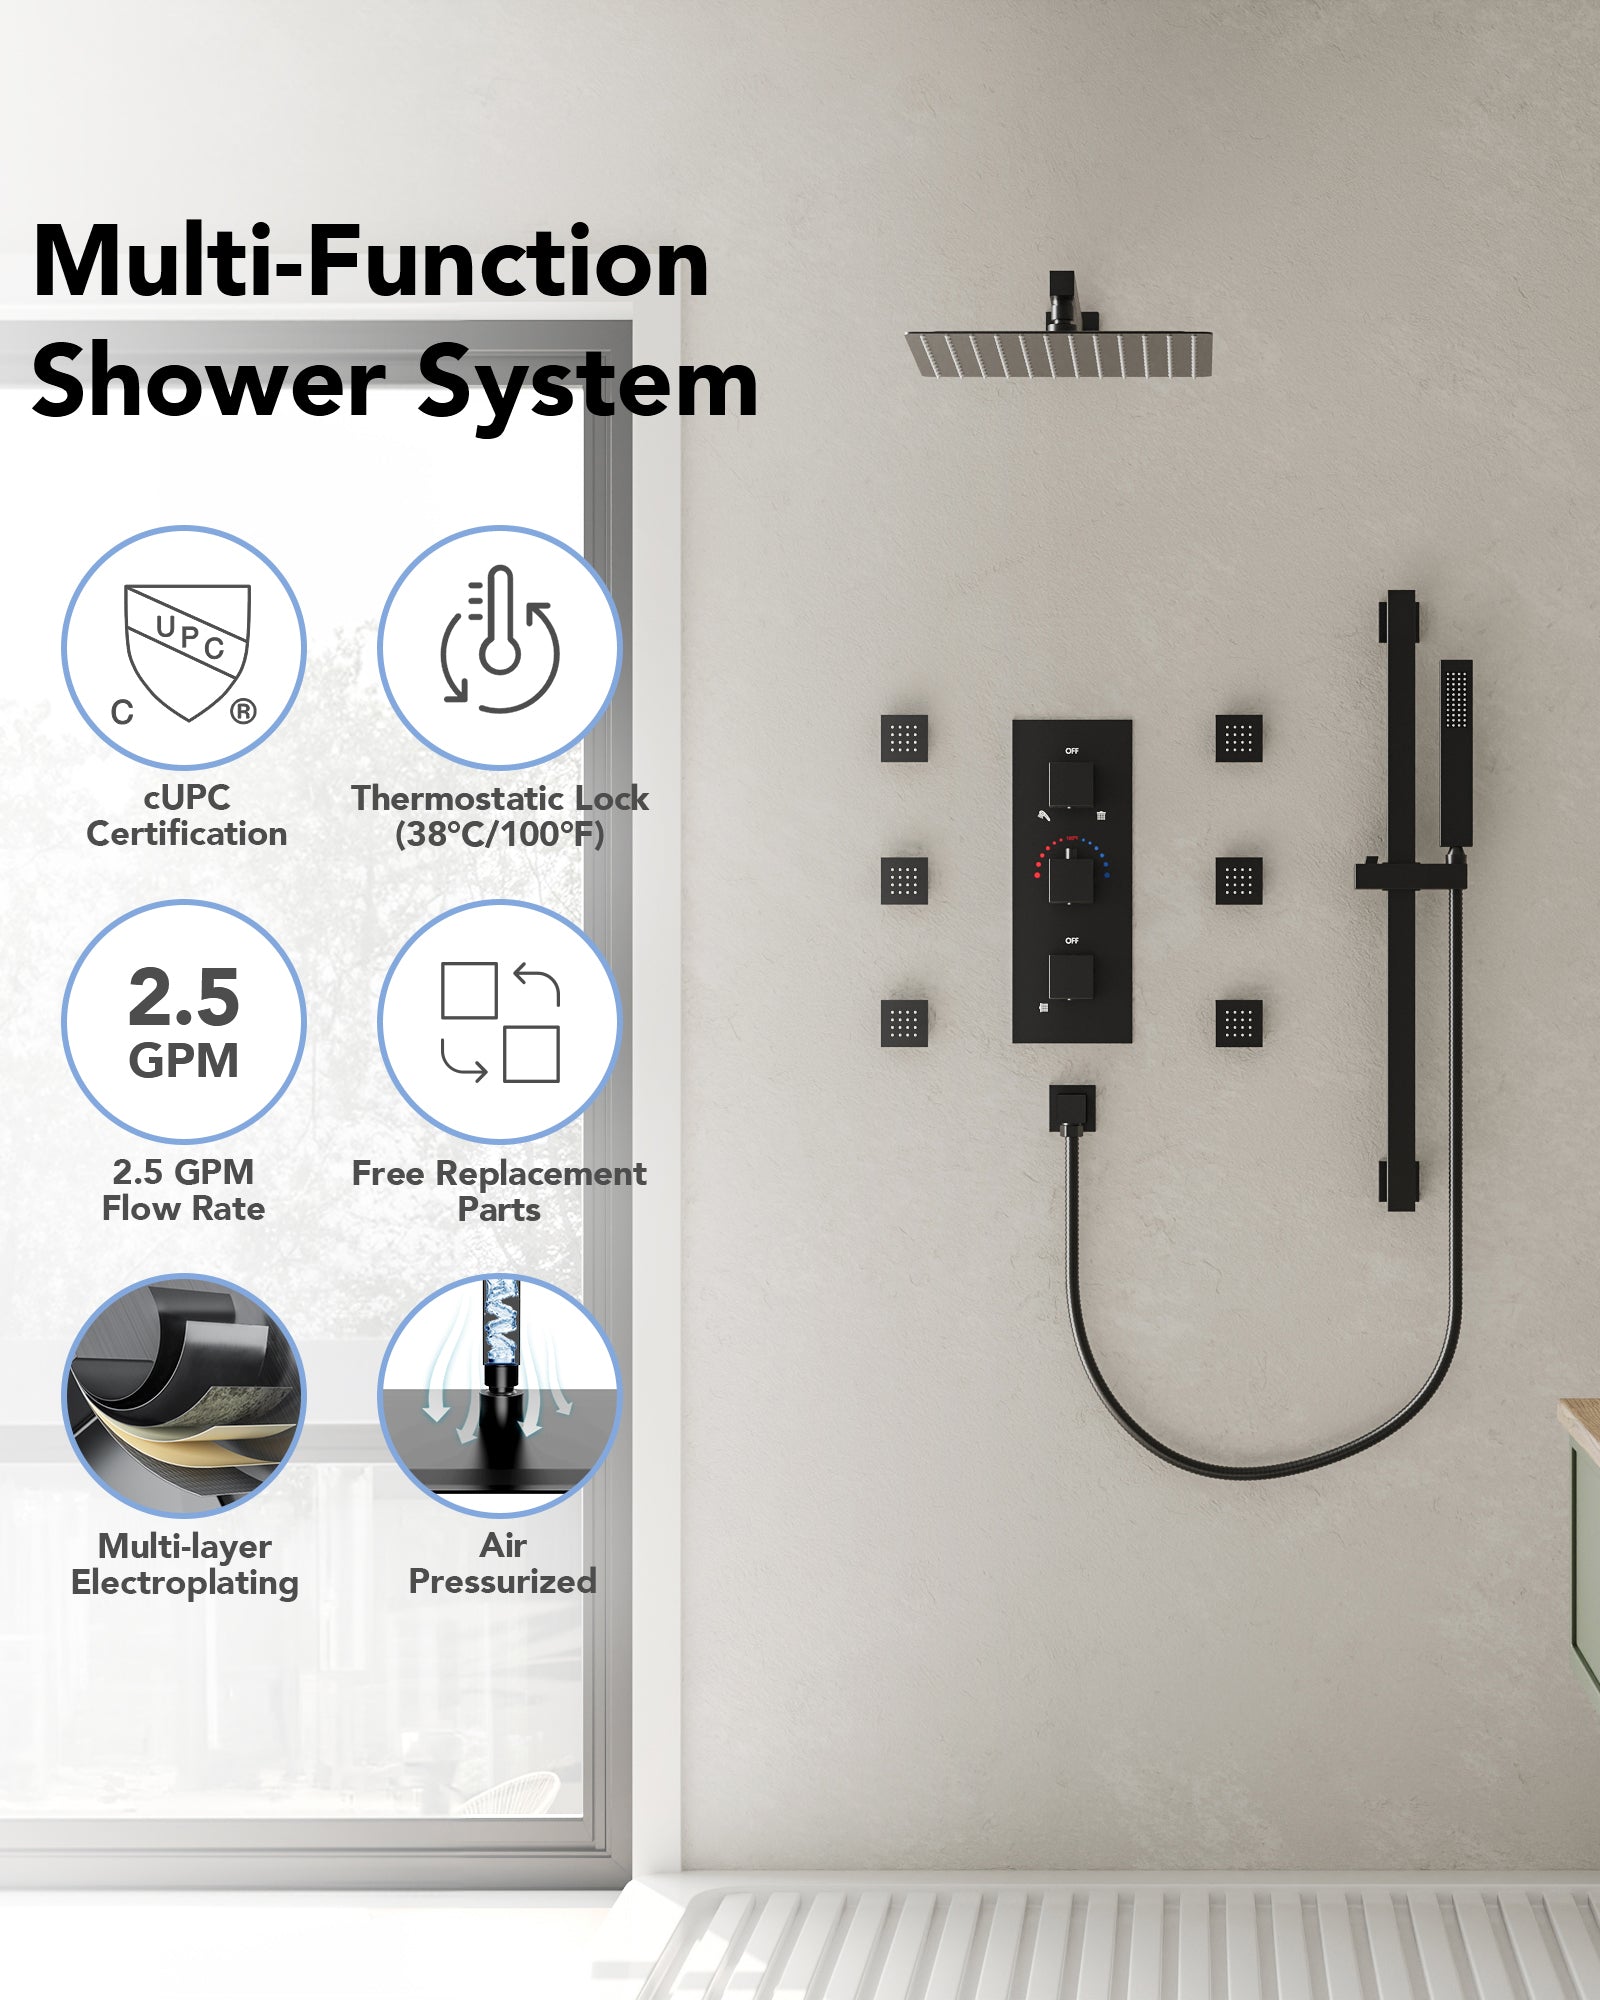 SFS-1016-BK12 EVERSTEIN Luxury wall mounted shower faucet system with fixed device and rough valve, with 6 body massage spray and hand-held shower faucet in Matte Black